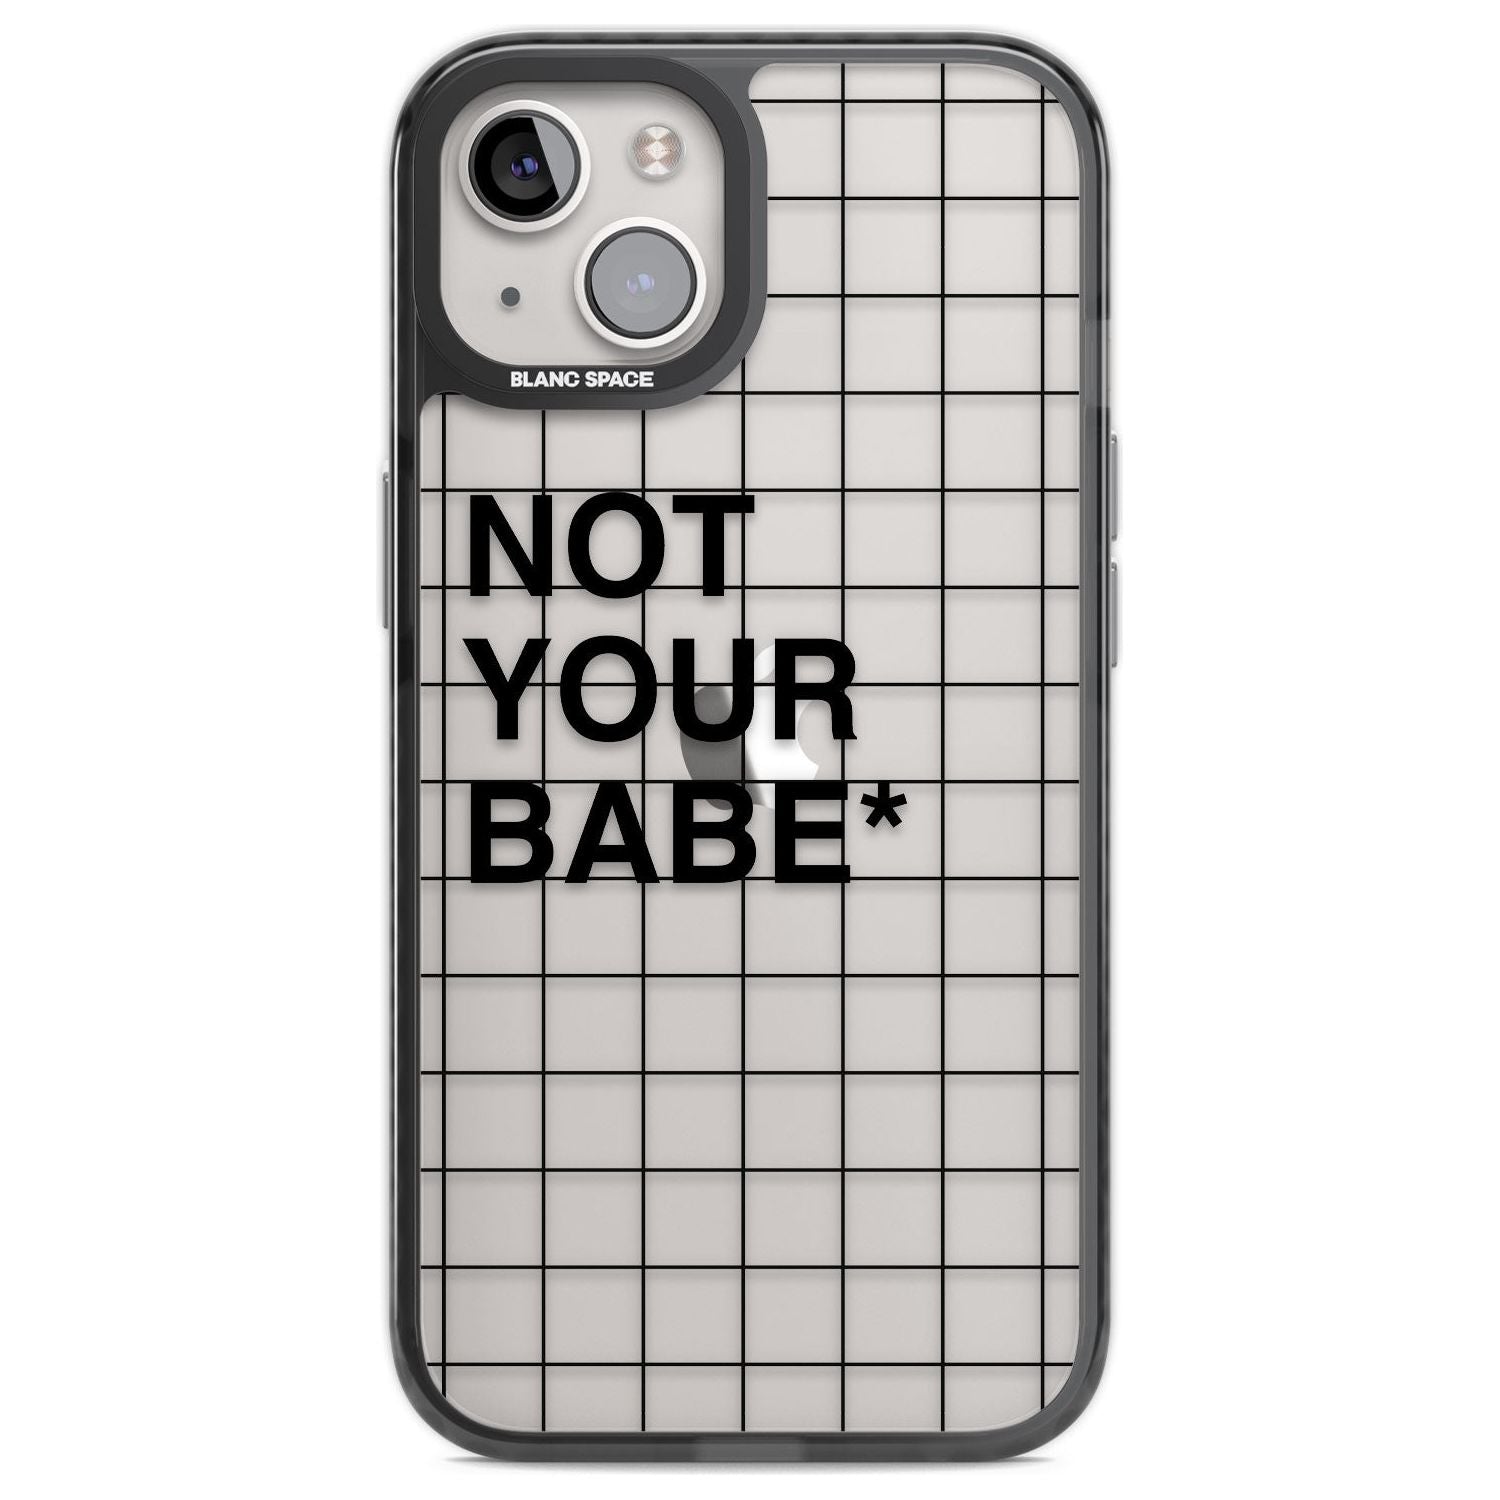 Grid Pattern Not Your Babe Phone Case iPhone 12 / Black Impact Case,iPhone 13 / Black Impact Case,iPhone 12 Pro / Black Impact Case,iPhone 14 / Black Impact Case,iPhone 15 Plus / Black Impact Case,iPhone 15 / Black Impact Case Blanc Space